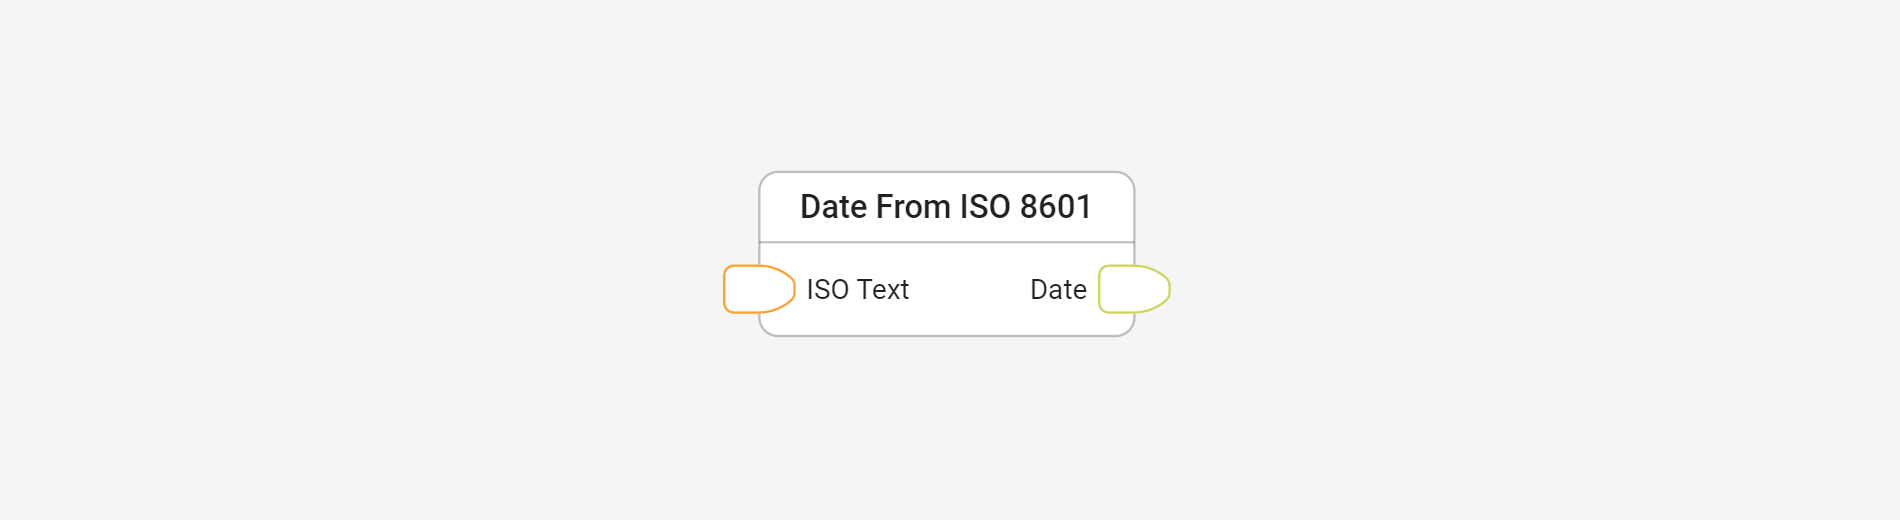 Convert an ISO date text to a date